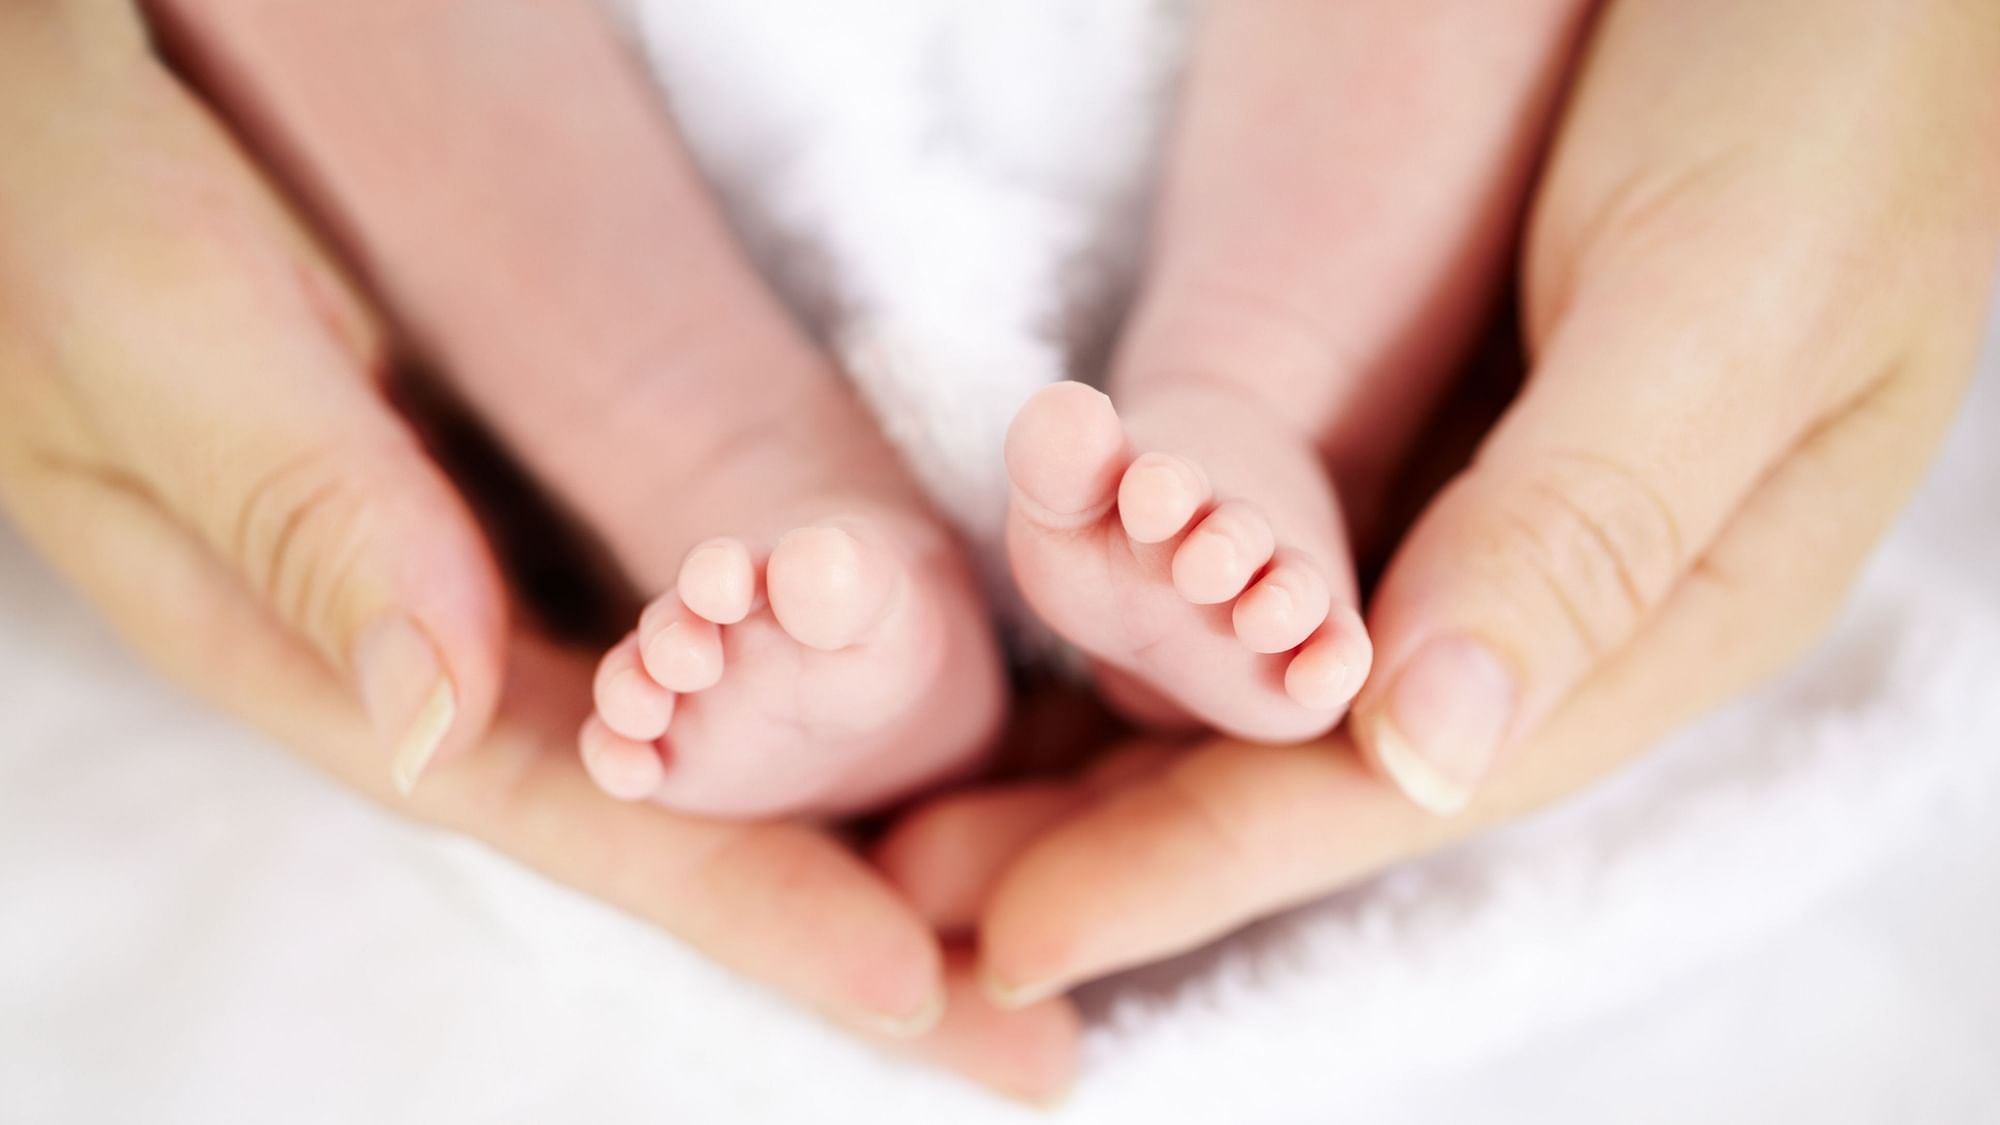 According to WHO, every year about 15 million babies around the world are born prematurely.